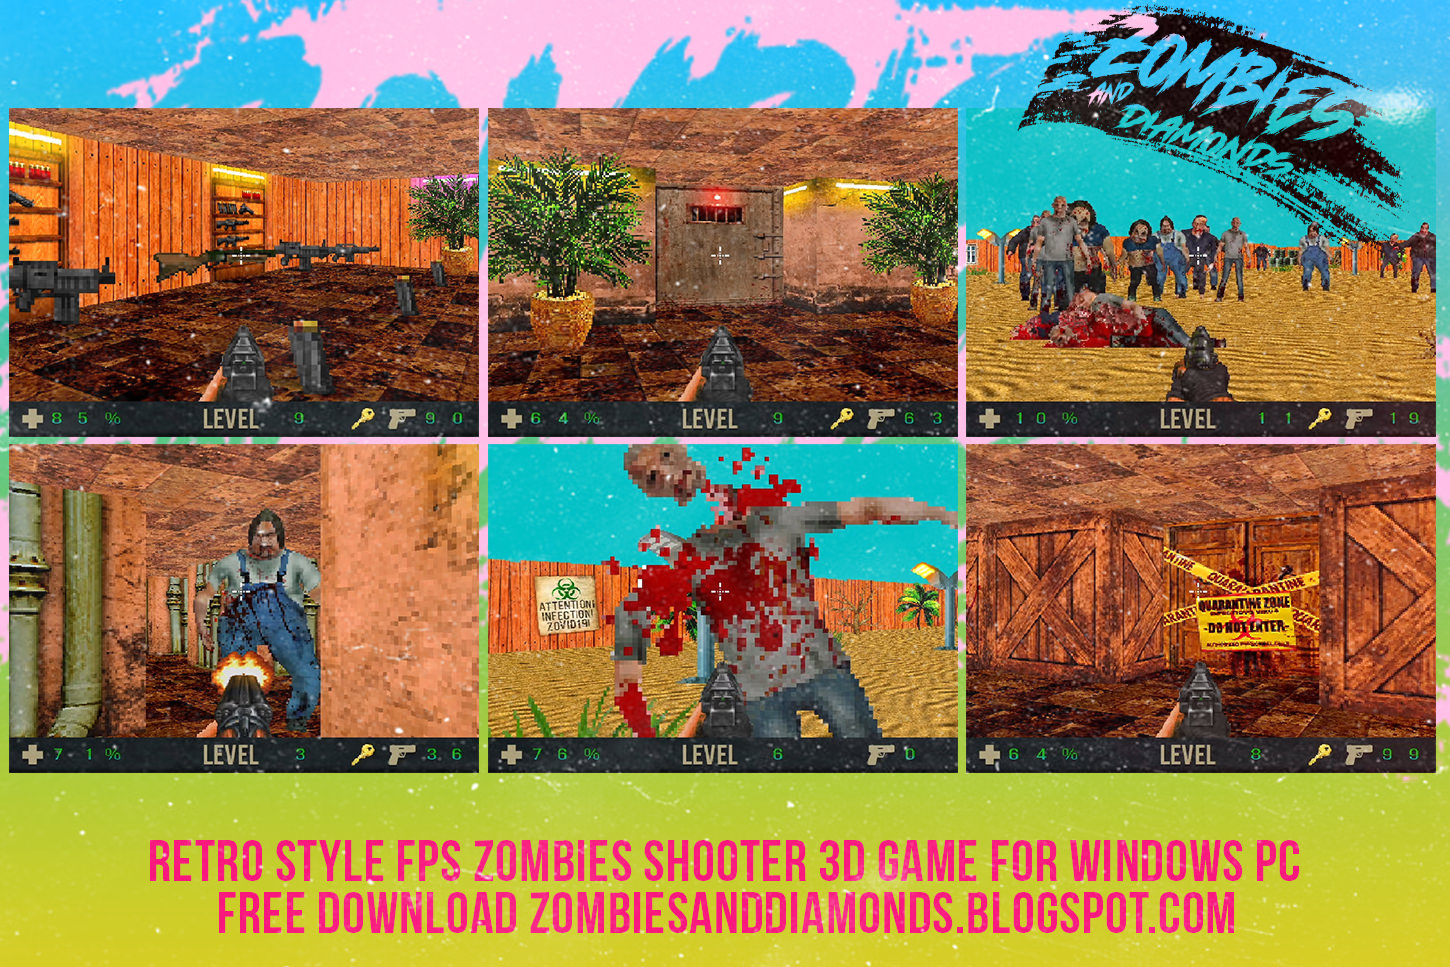 RETRO STYLE FPS ZOMBIES SHOOTER 3D GAME